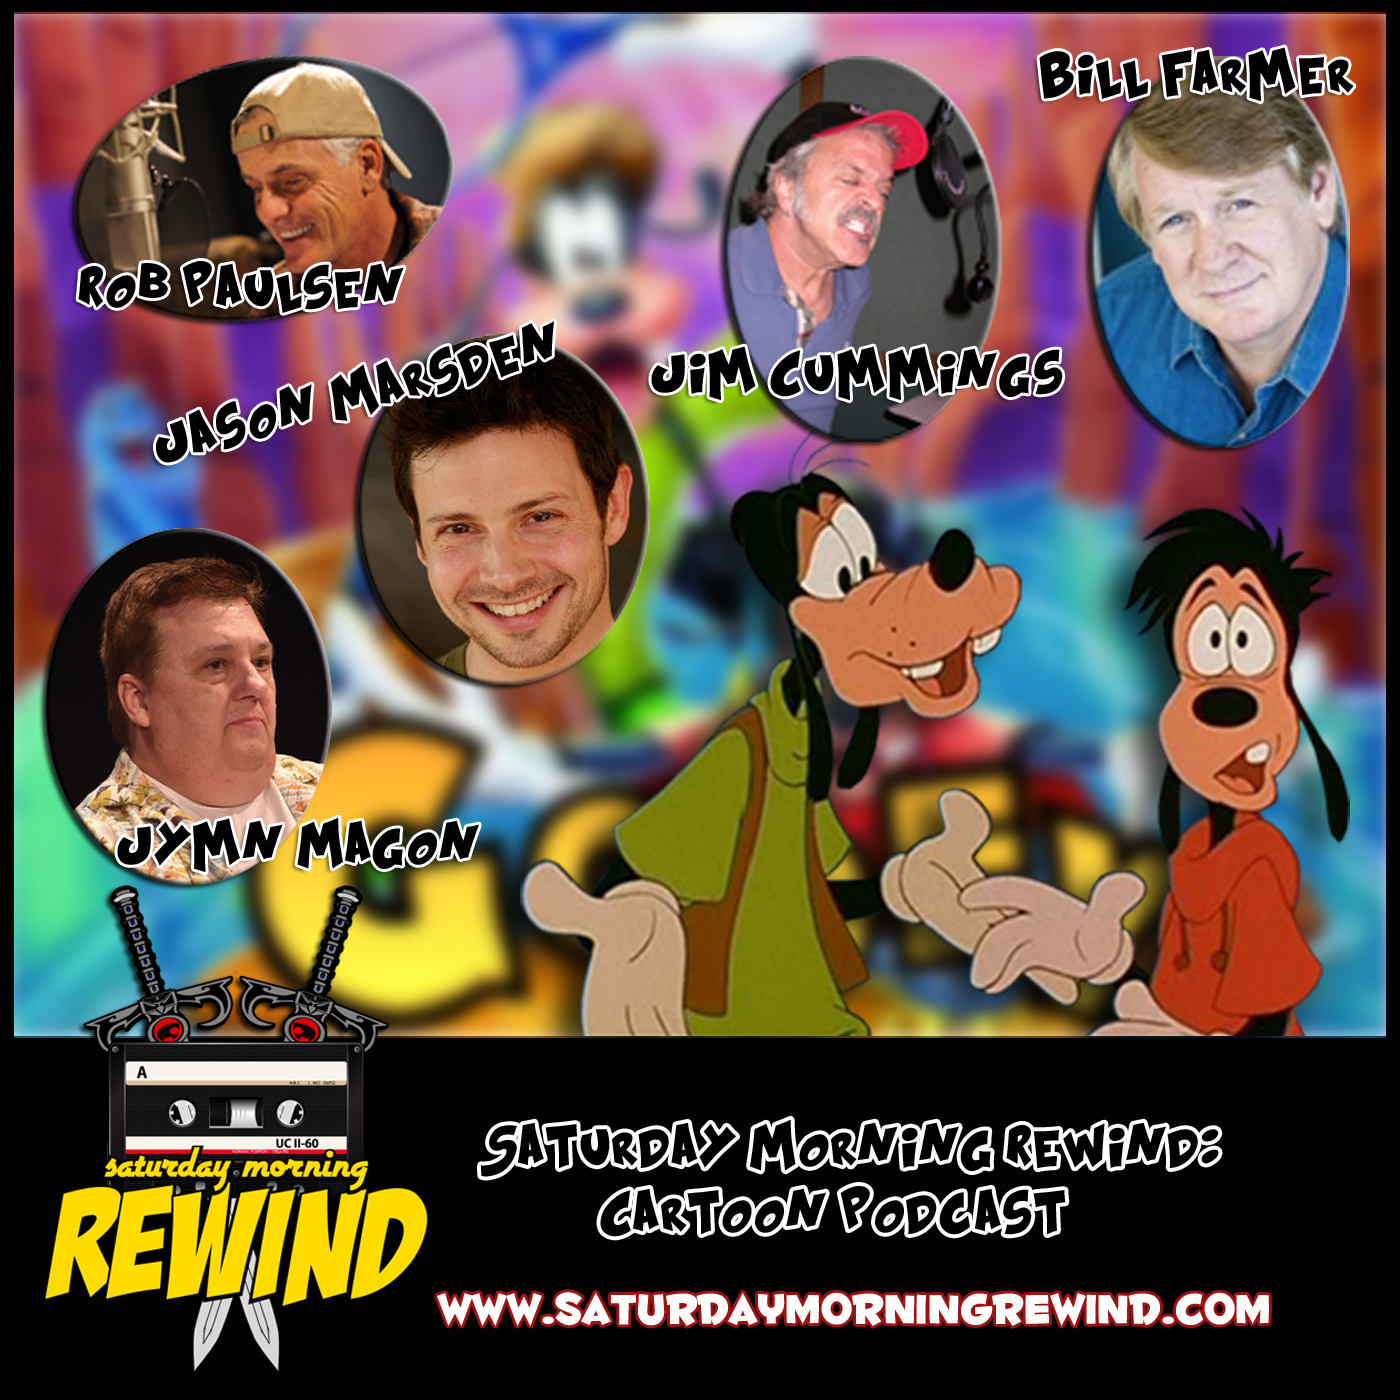 51: Jymn Magon interview and full audio from Disney’s D23 2015 Expo panel of A Goofy Movie 20 year reunion!